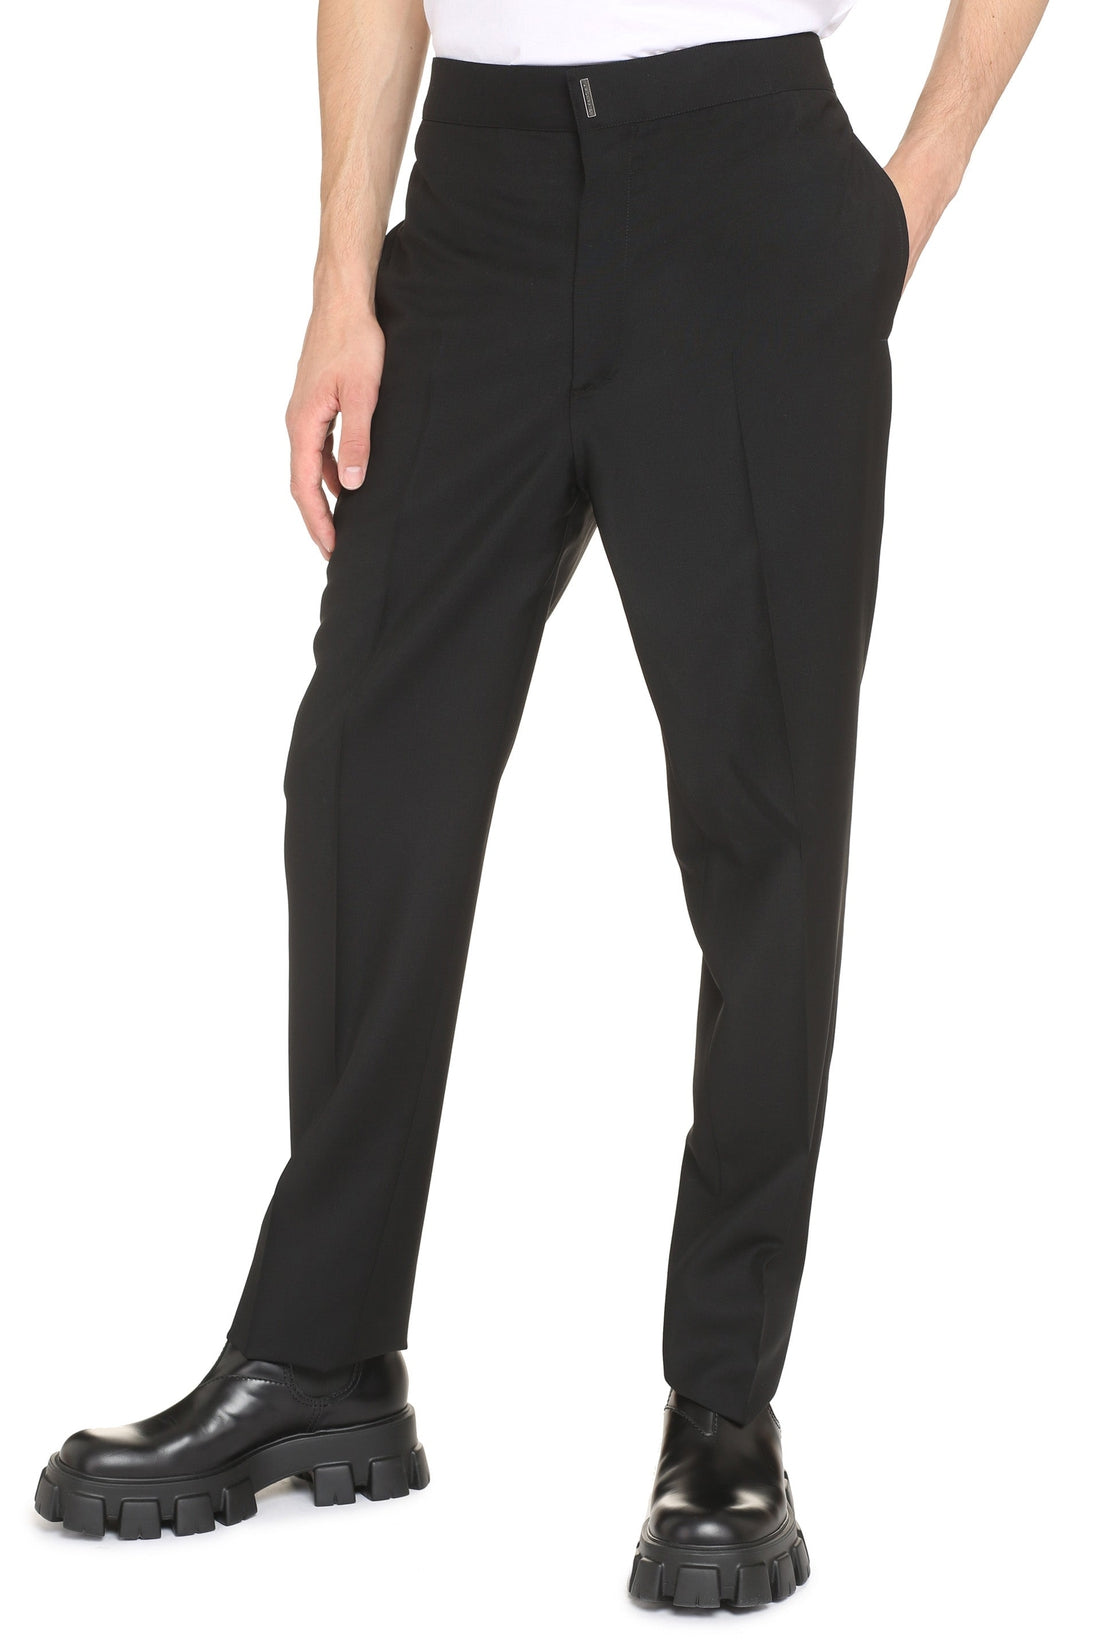 Givenchy-OUTLET-SALE-Tailored wool trousers-ARCHIVIST